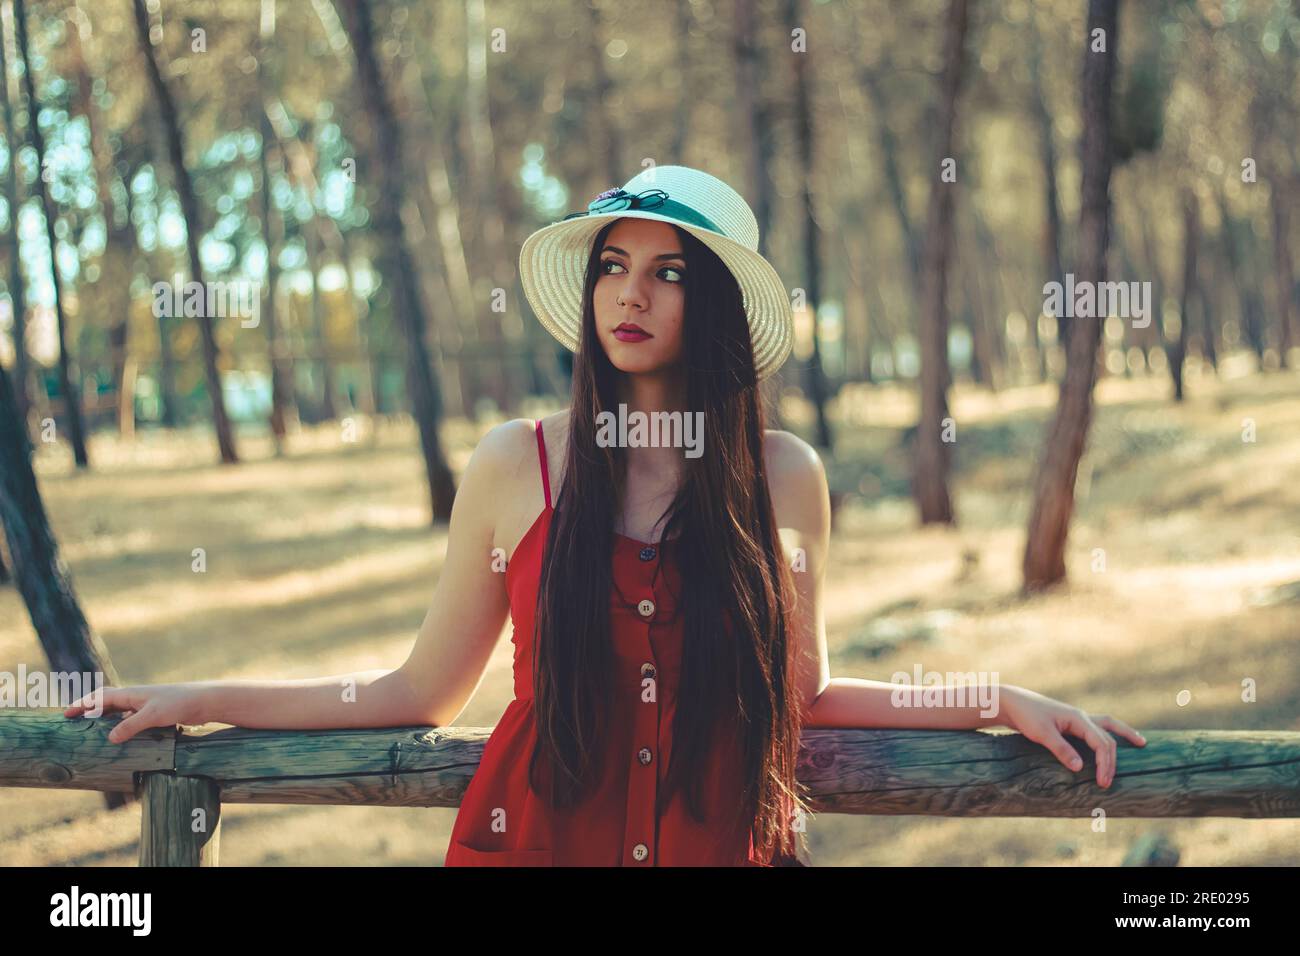 A young woman enjoying a time by herself in a forest Stock Photo